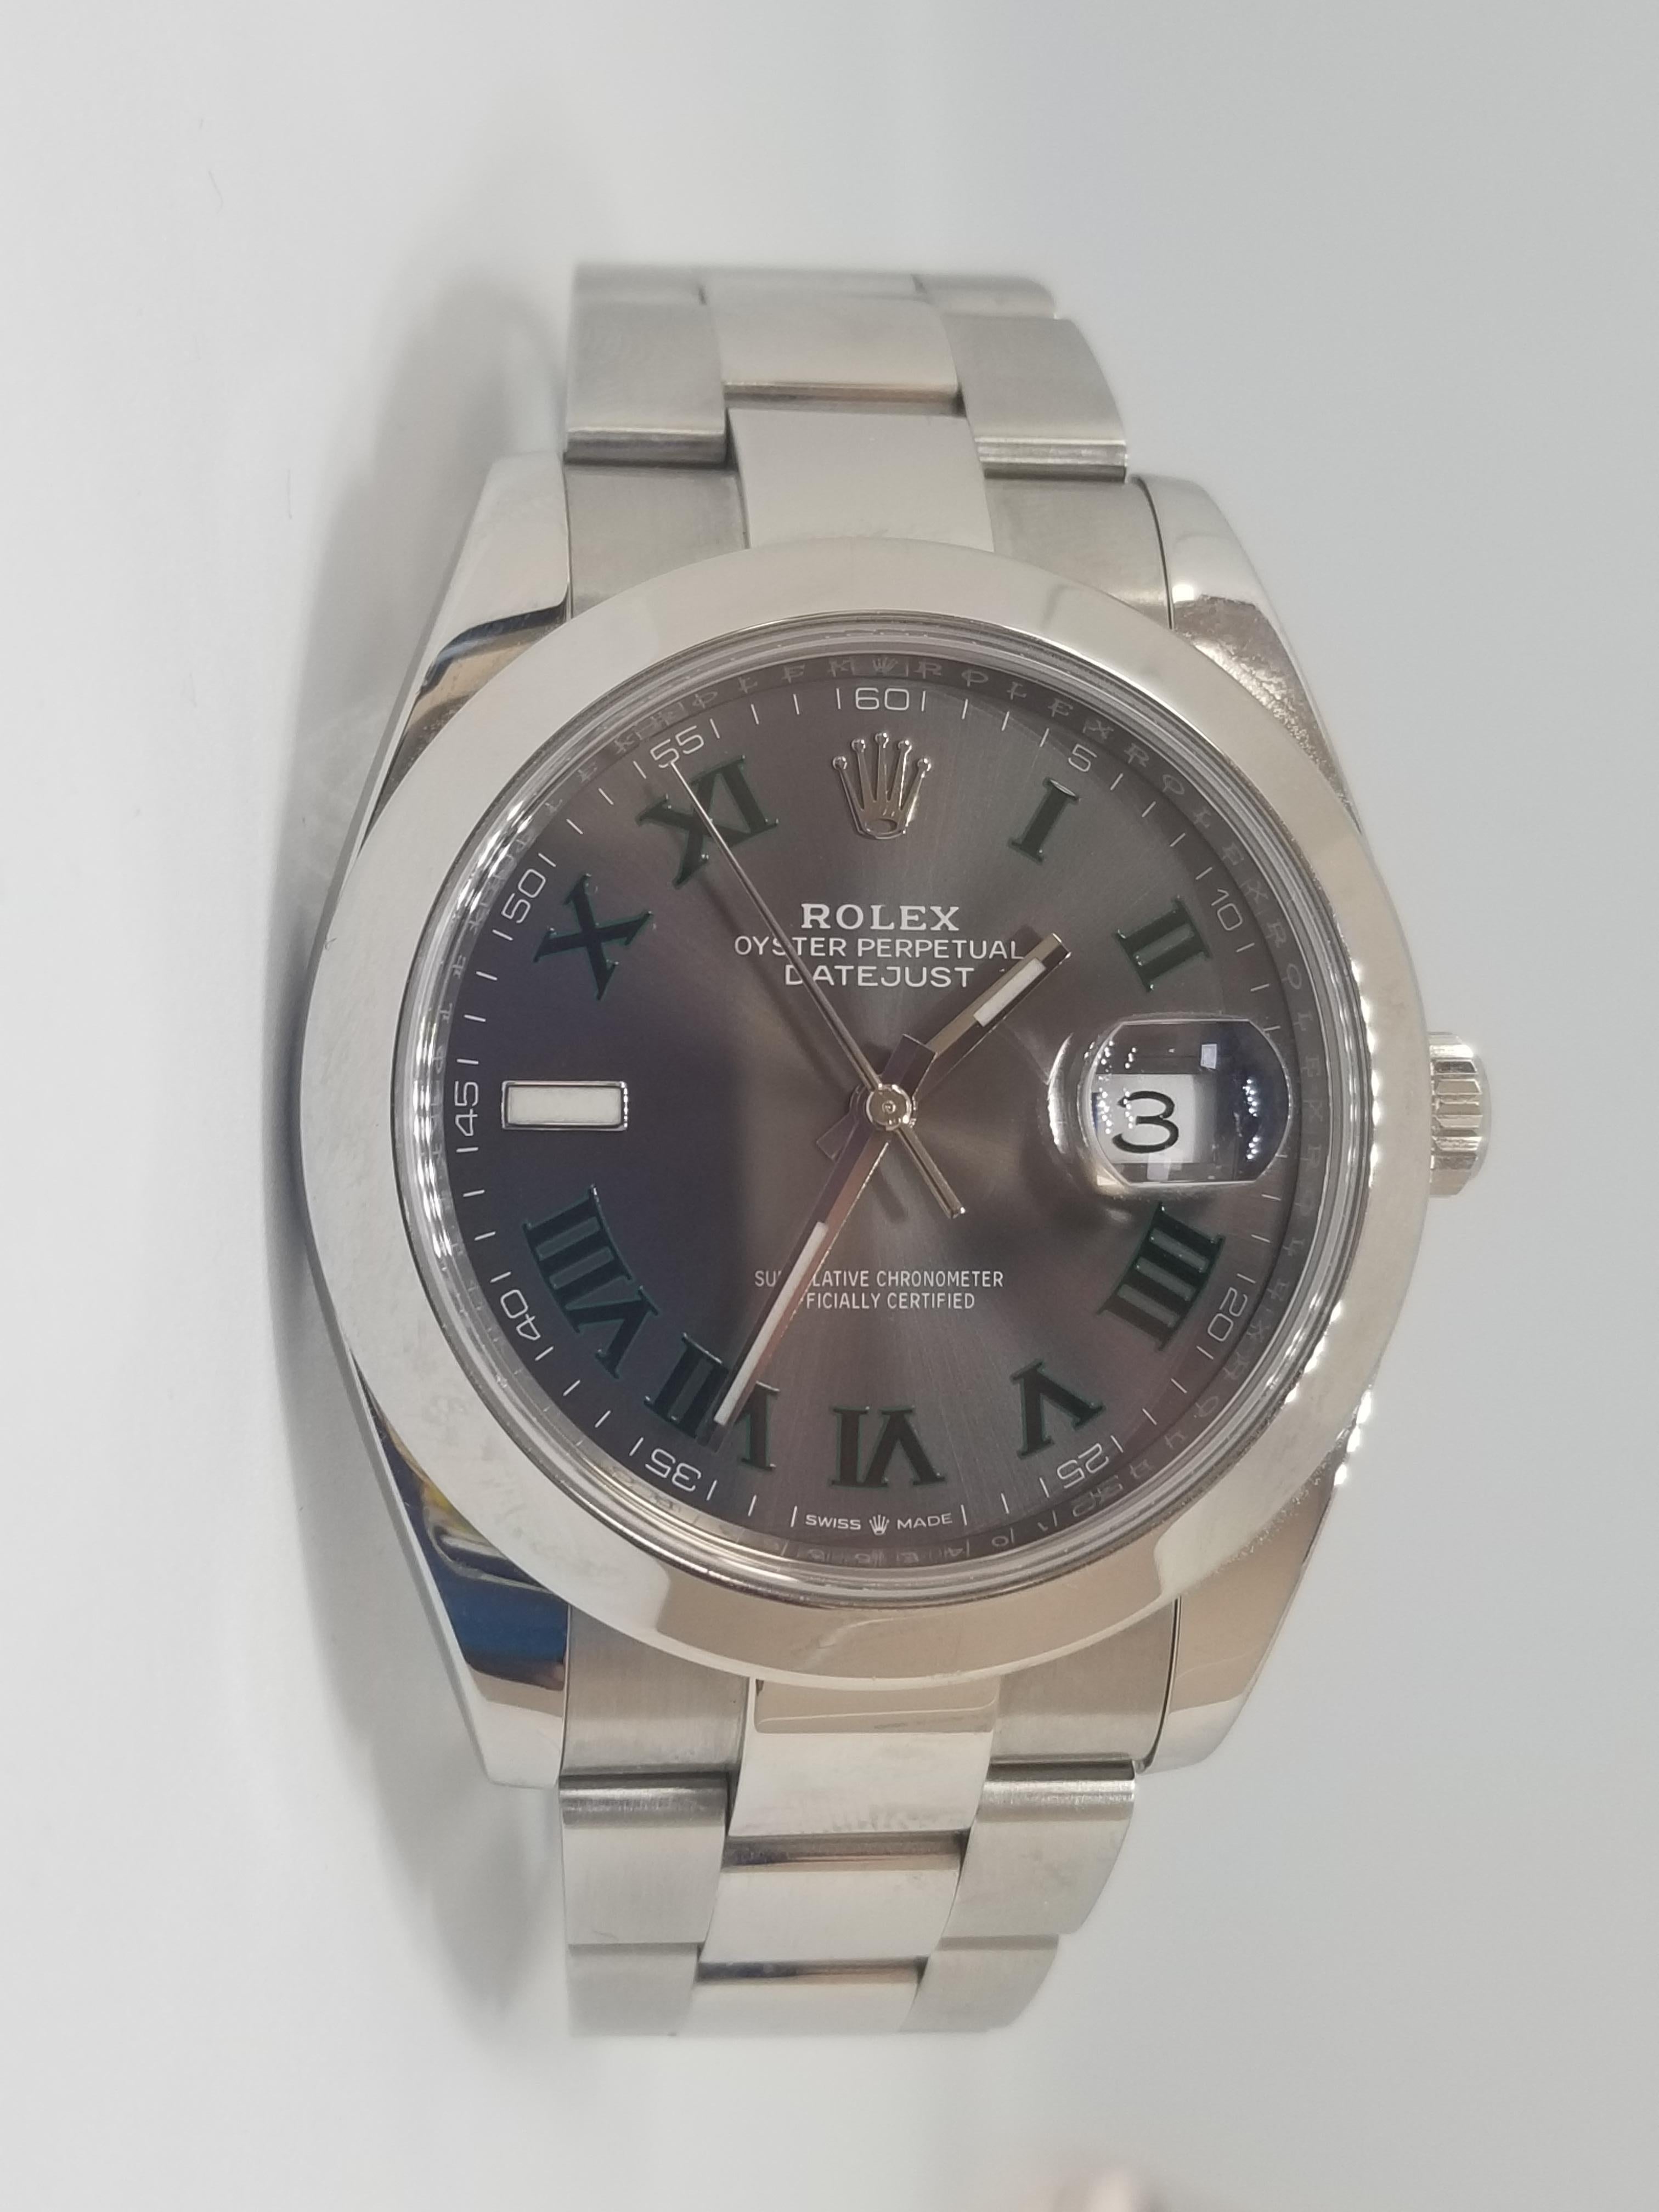 Watch comes with box and card. Also has original tags. Excellent condition. 2019 Wimbledon 41mm Model 126300
